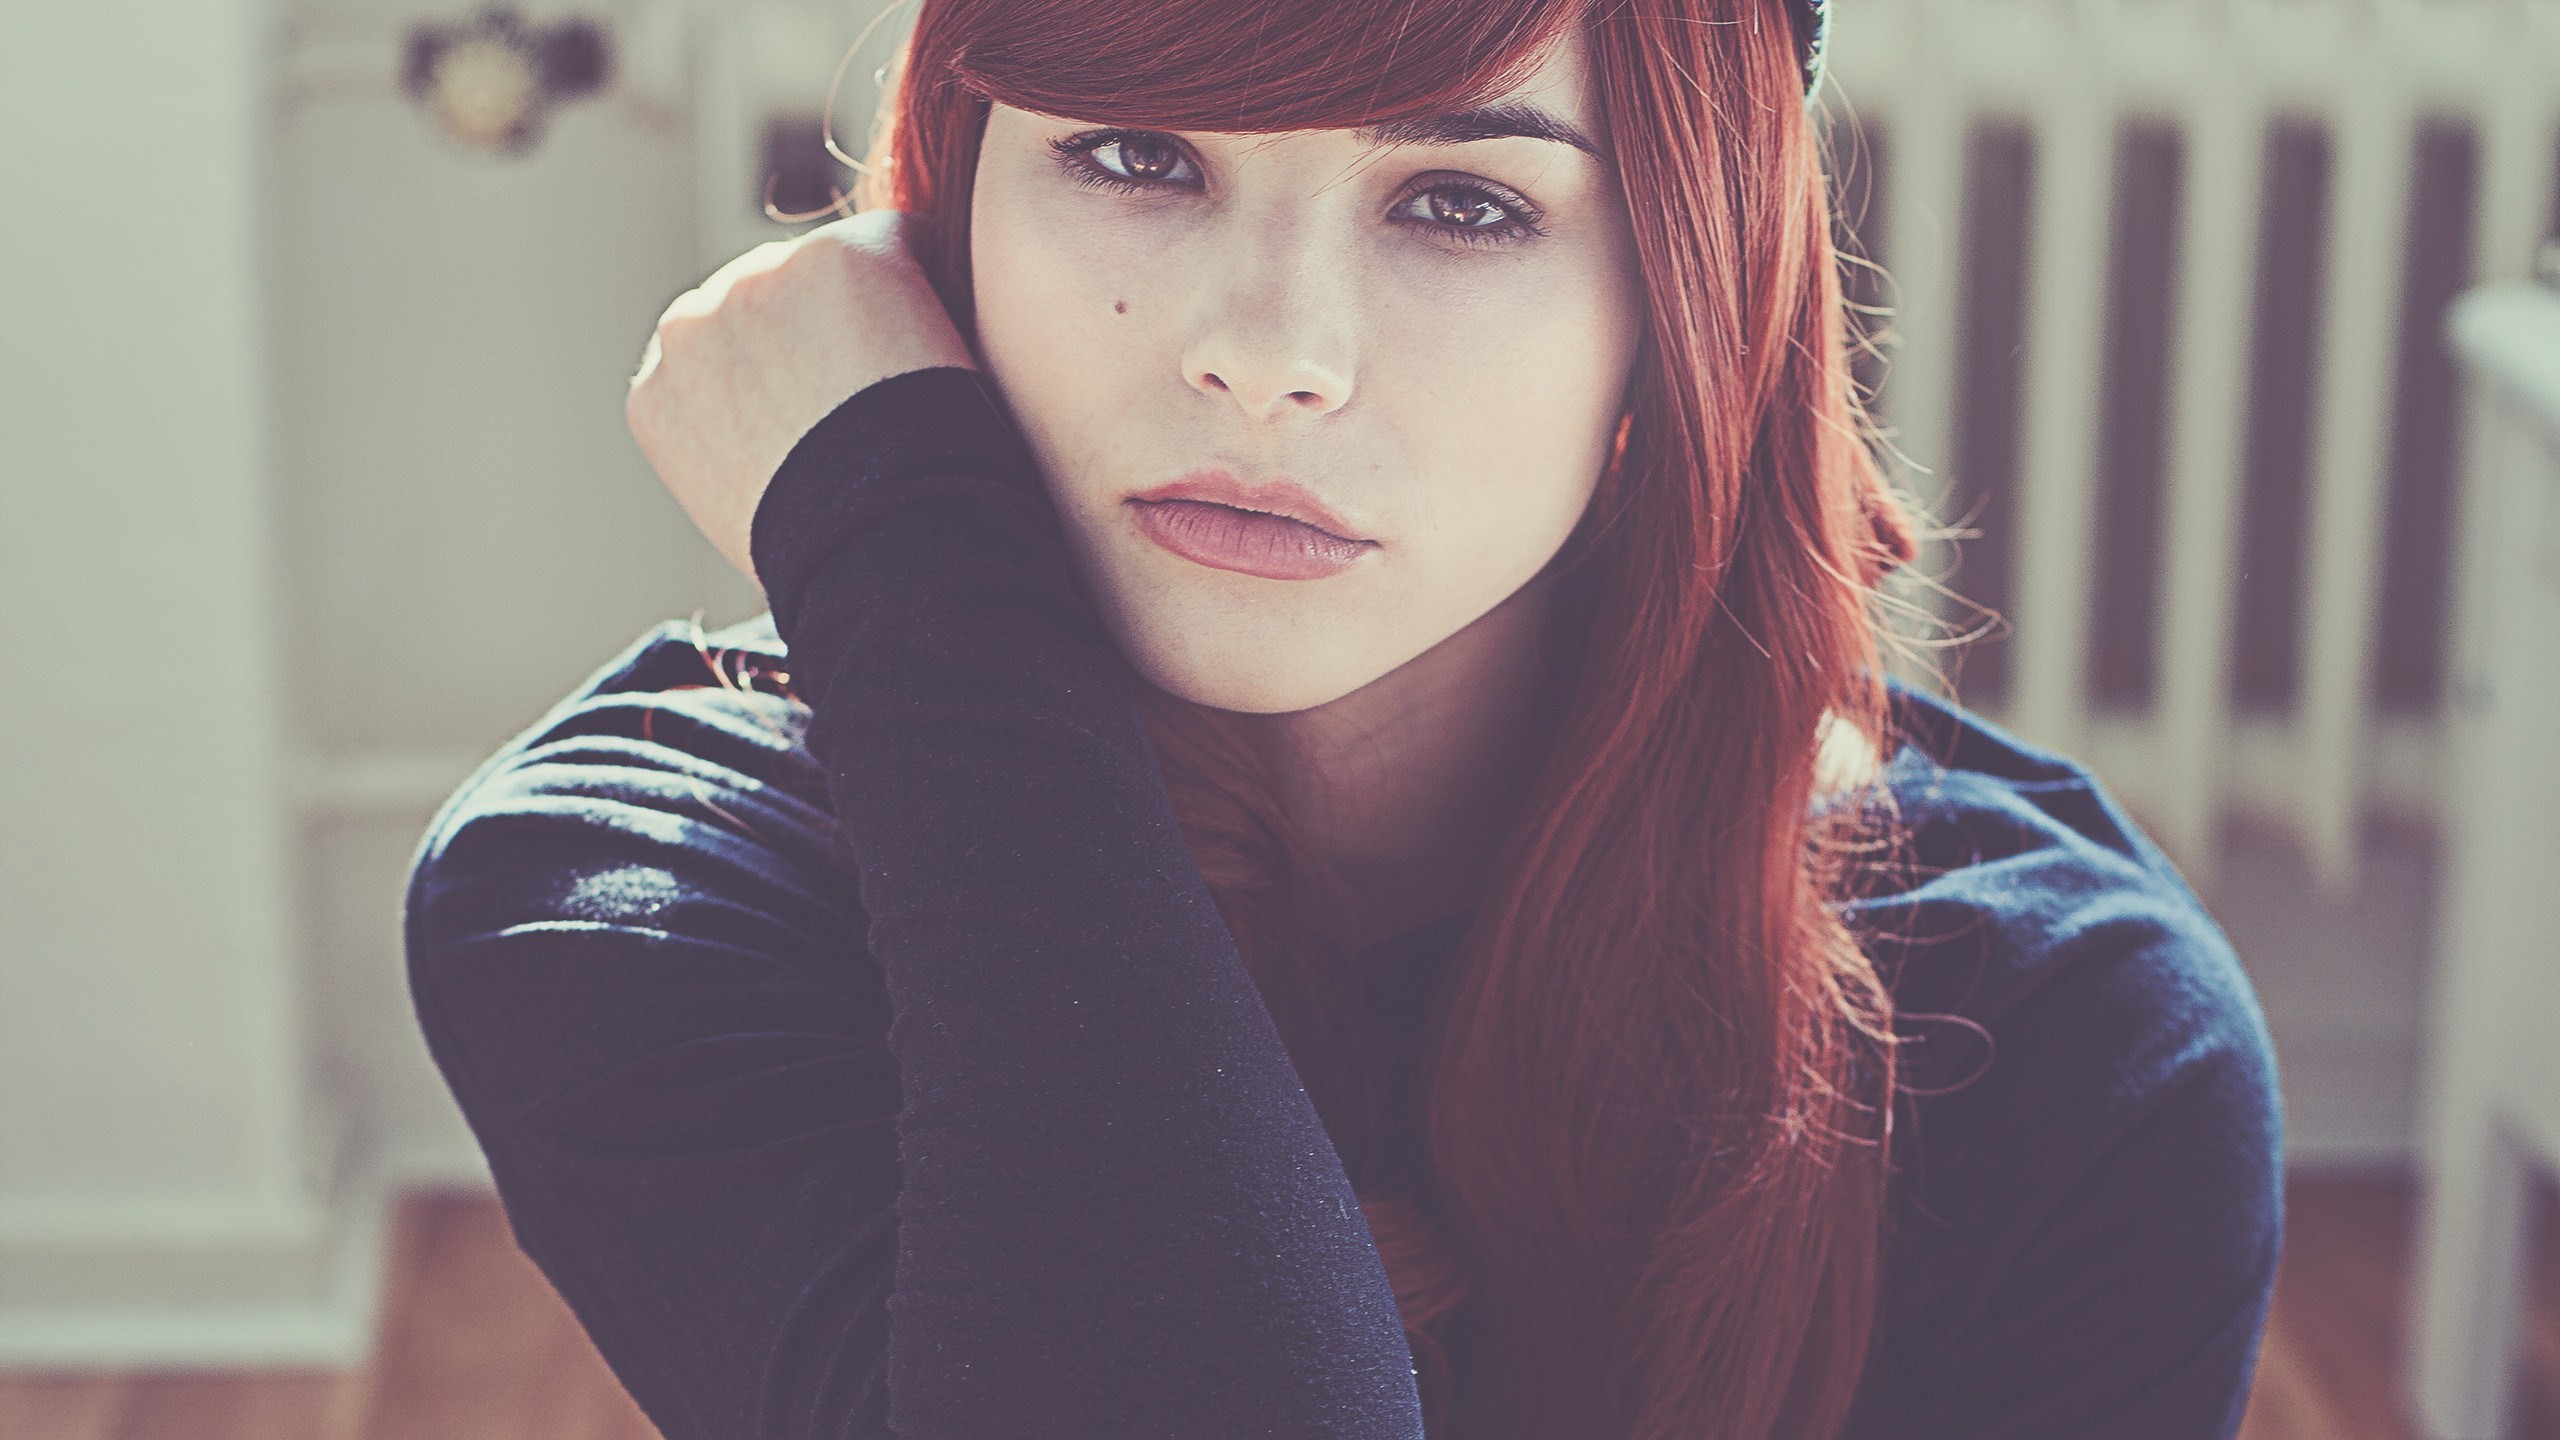 People 2560x1440 women face redhead Julia Coldfront model looking at viewer dyed hair women indoors indoors makeup red lipstick closeup